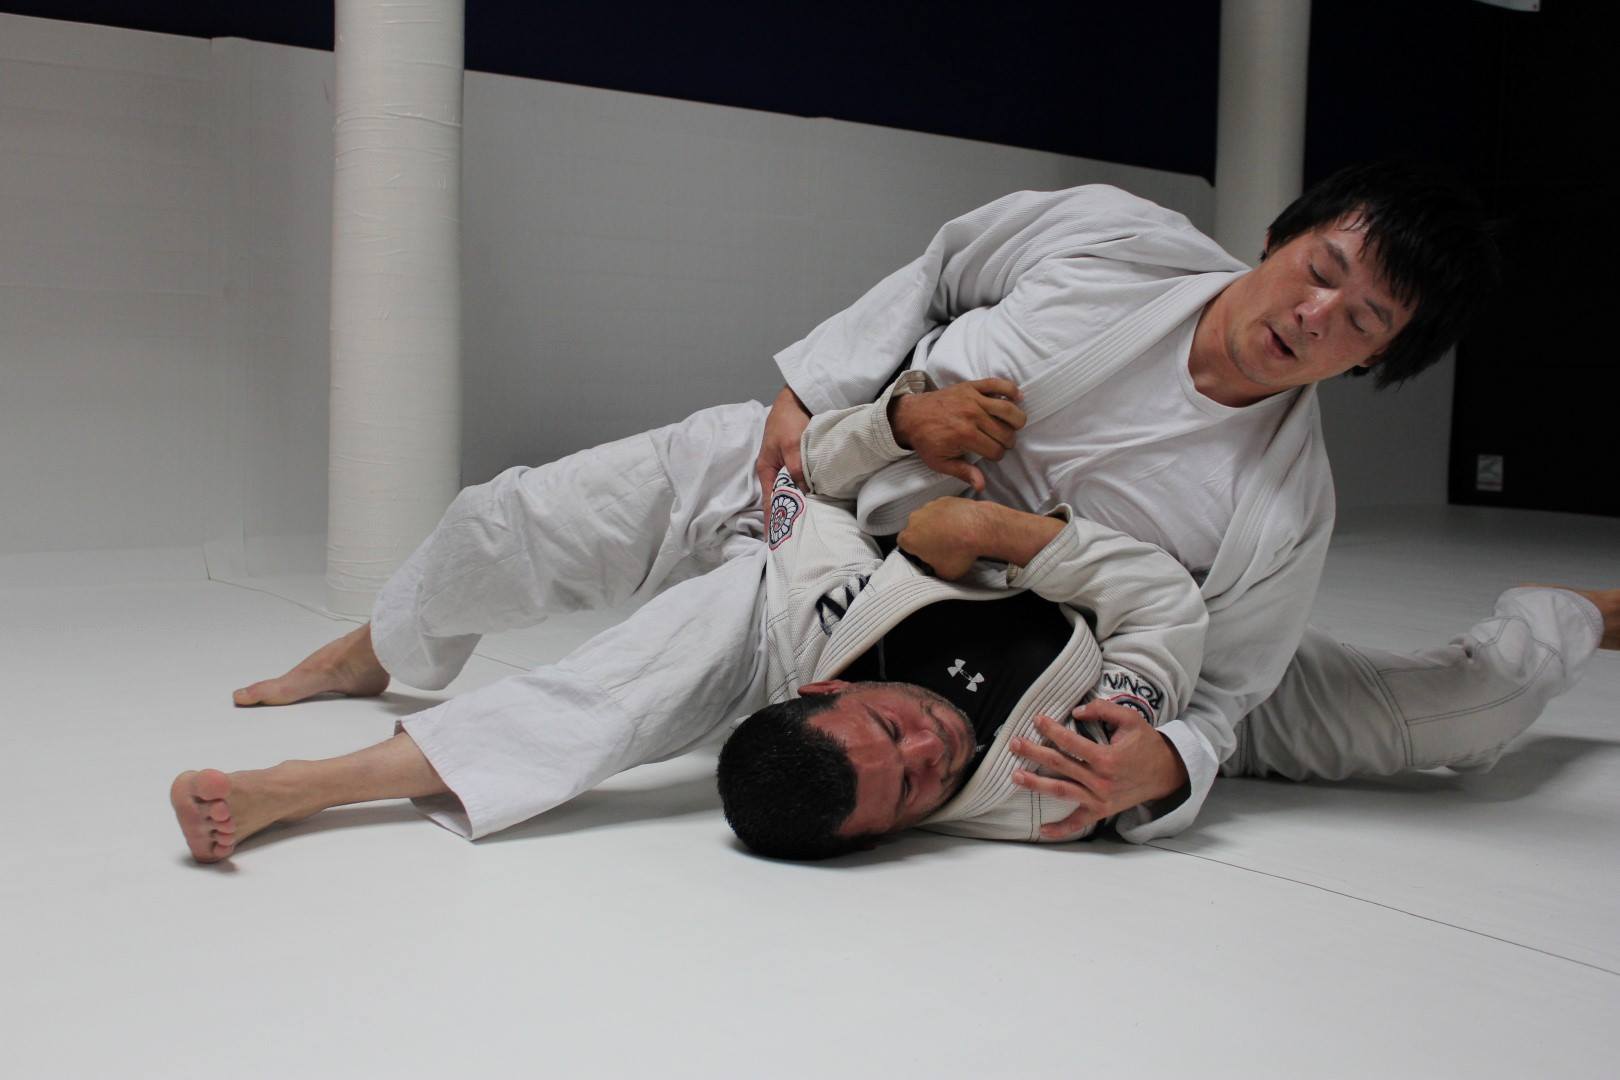 Henry Akins: “There Is No Universal Standard In Jiu-Jitsu For What Any Belt Is.”